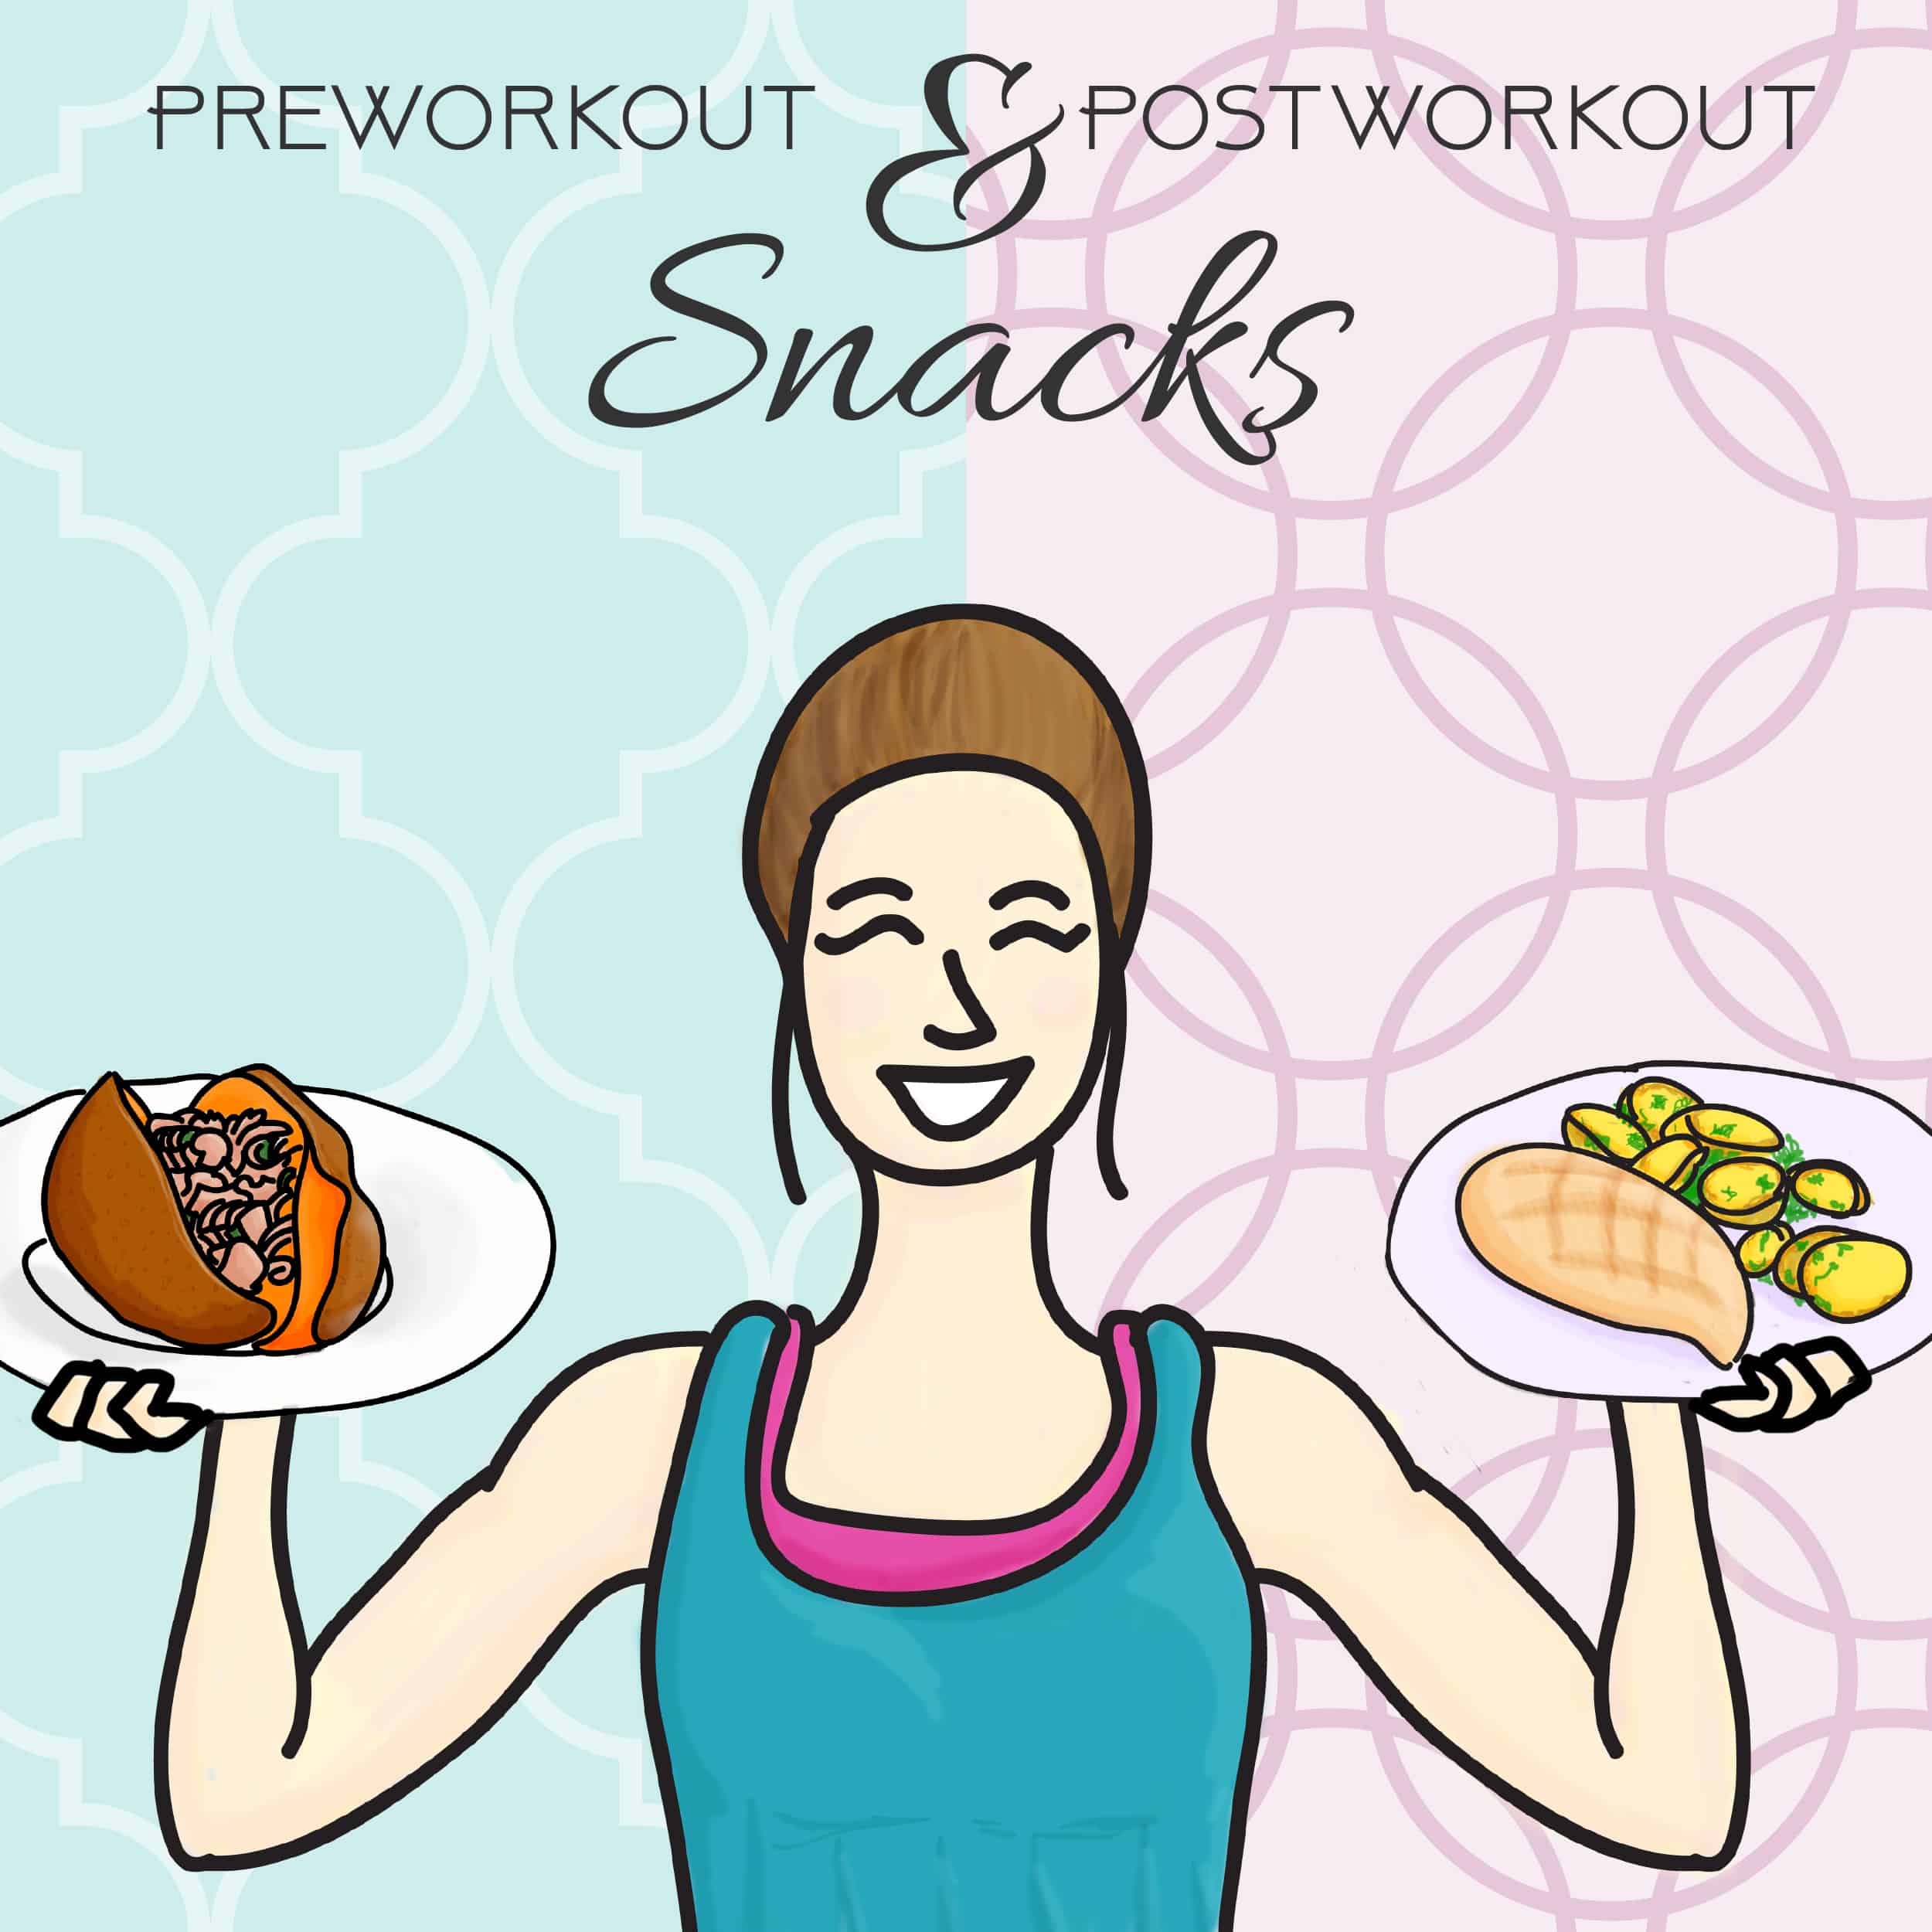 10 Best Pre and Post Workout Snacks - Ever wondered what to eat before and after a workout? Here are 10 ideas, with information as to why these are good choices! | #Foodfaithfitness | #Fitness #Nutrition #Healthysnack #Preworkout #Postworkout